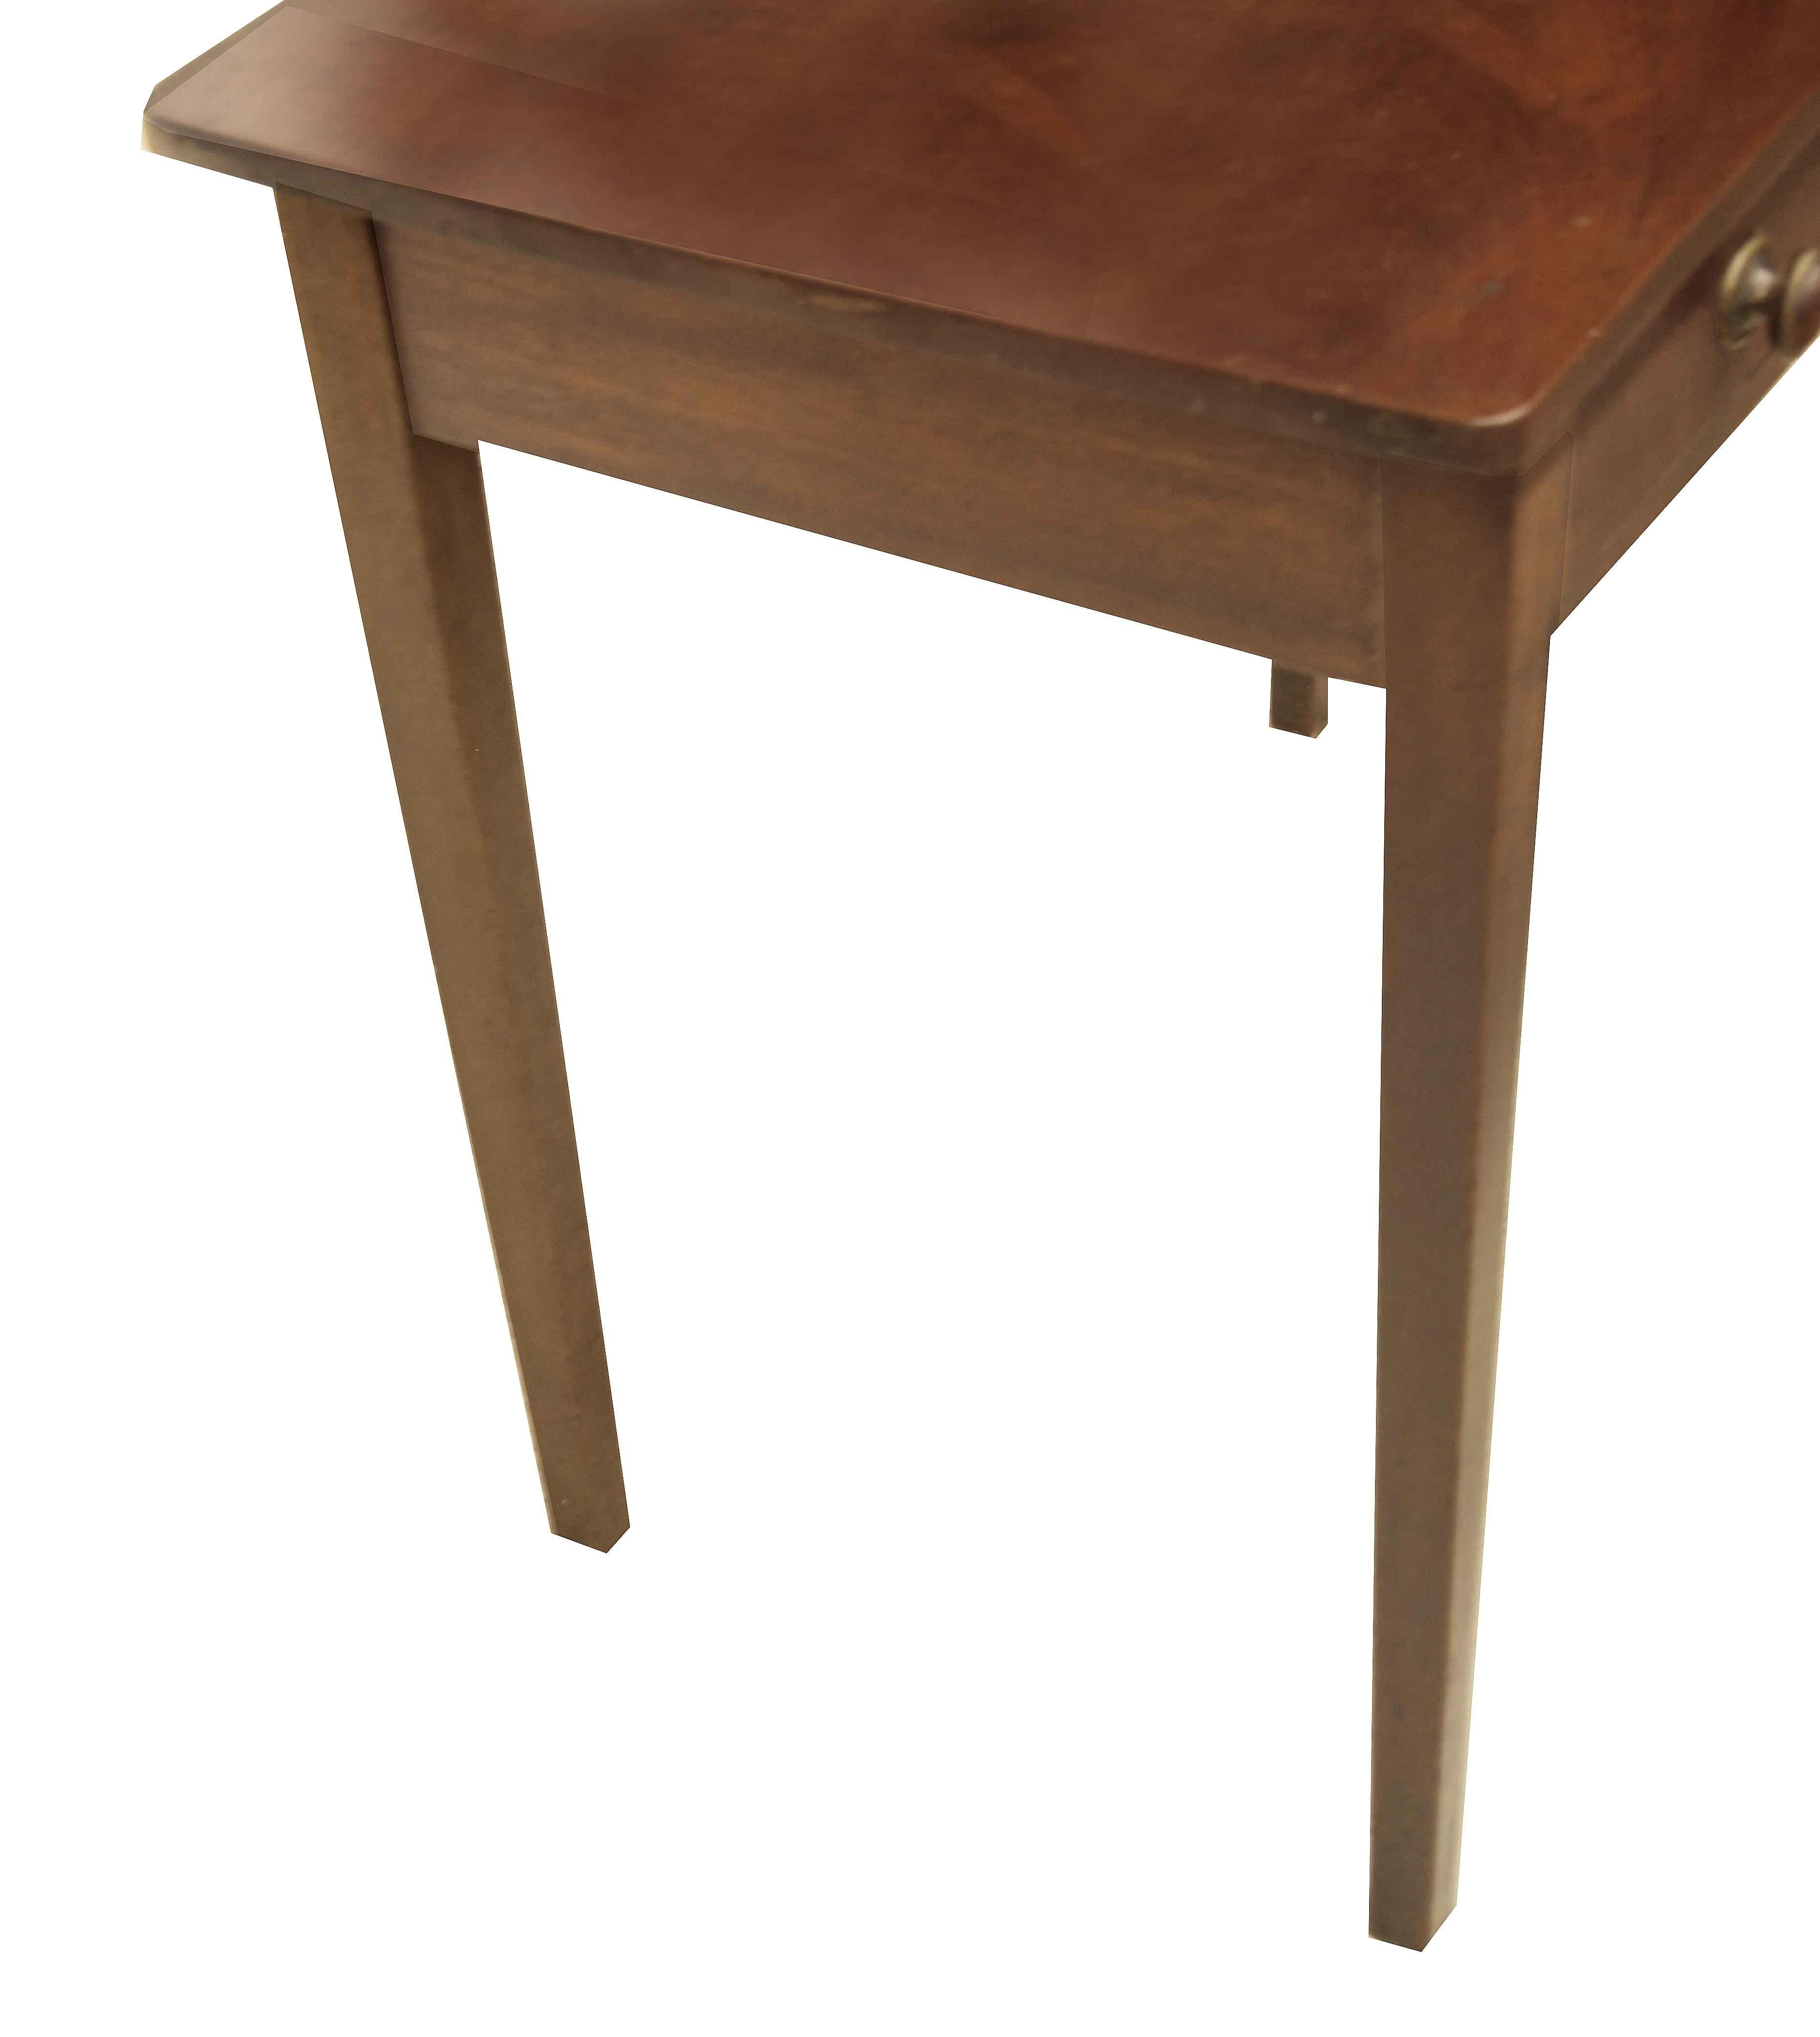 English Hepplewhite side table,  this mahogany table has a beautifully figured one board top.  The single drawer has unusual mahogany knobs encased with brass( they are original).  The legs are nicely tapered.       